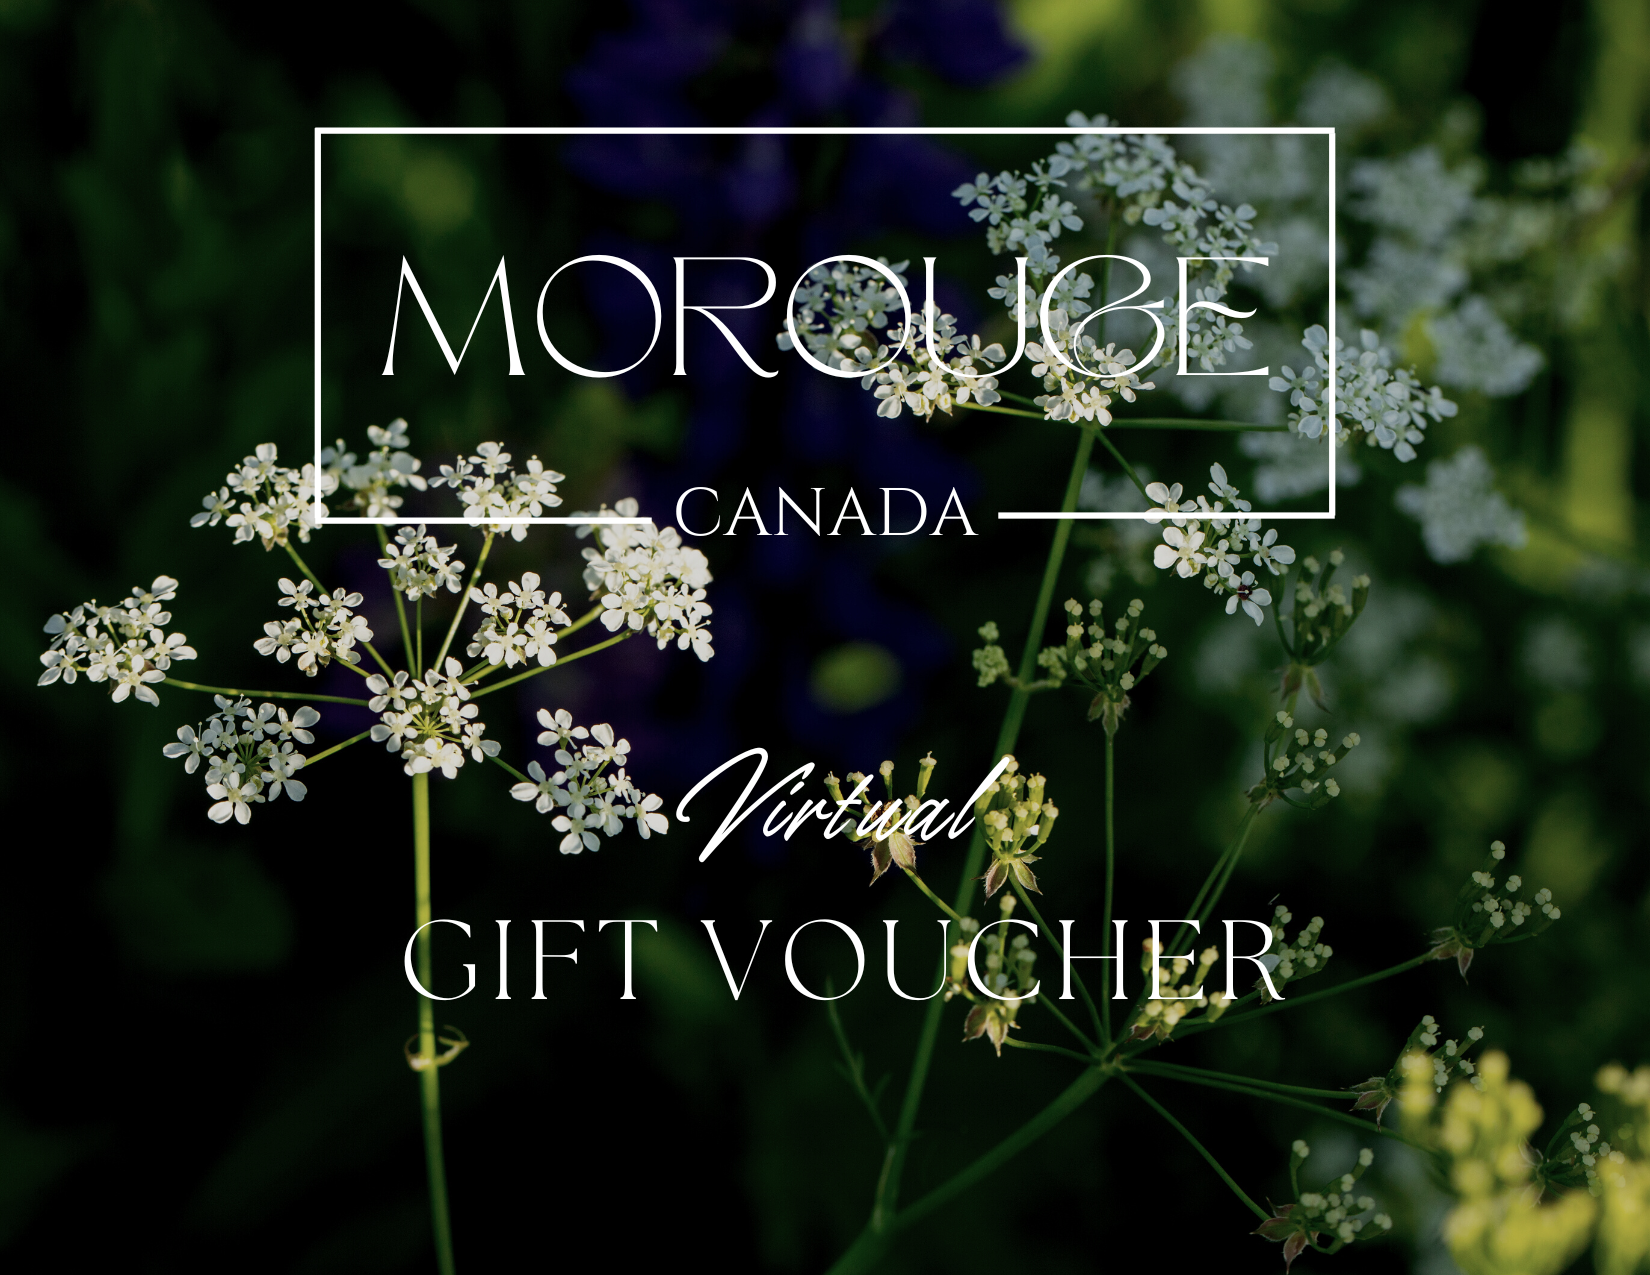 Morouge Canada virtual gift card. Soap and candle making supplies.